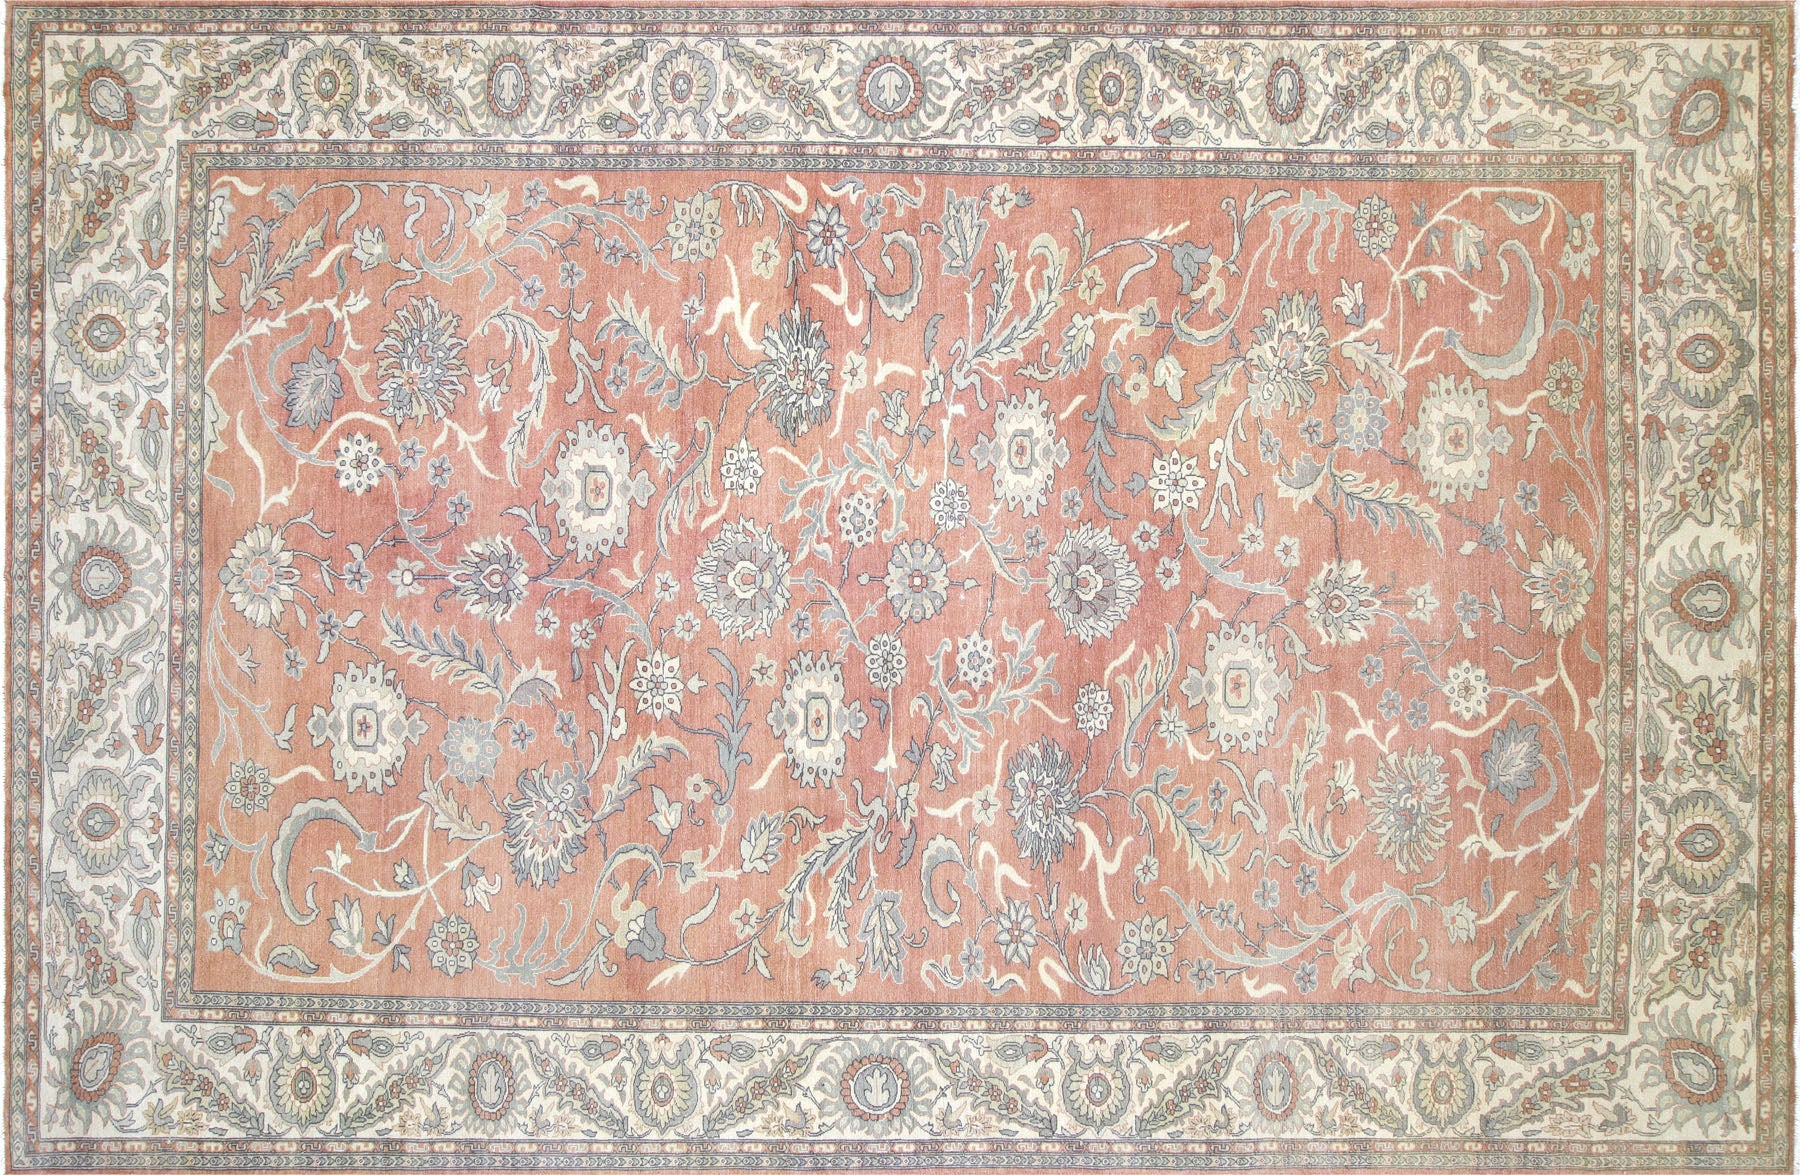 Recently Woven Egyptian Sultanabad Carpet - 11'8" x 17'11"